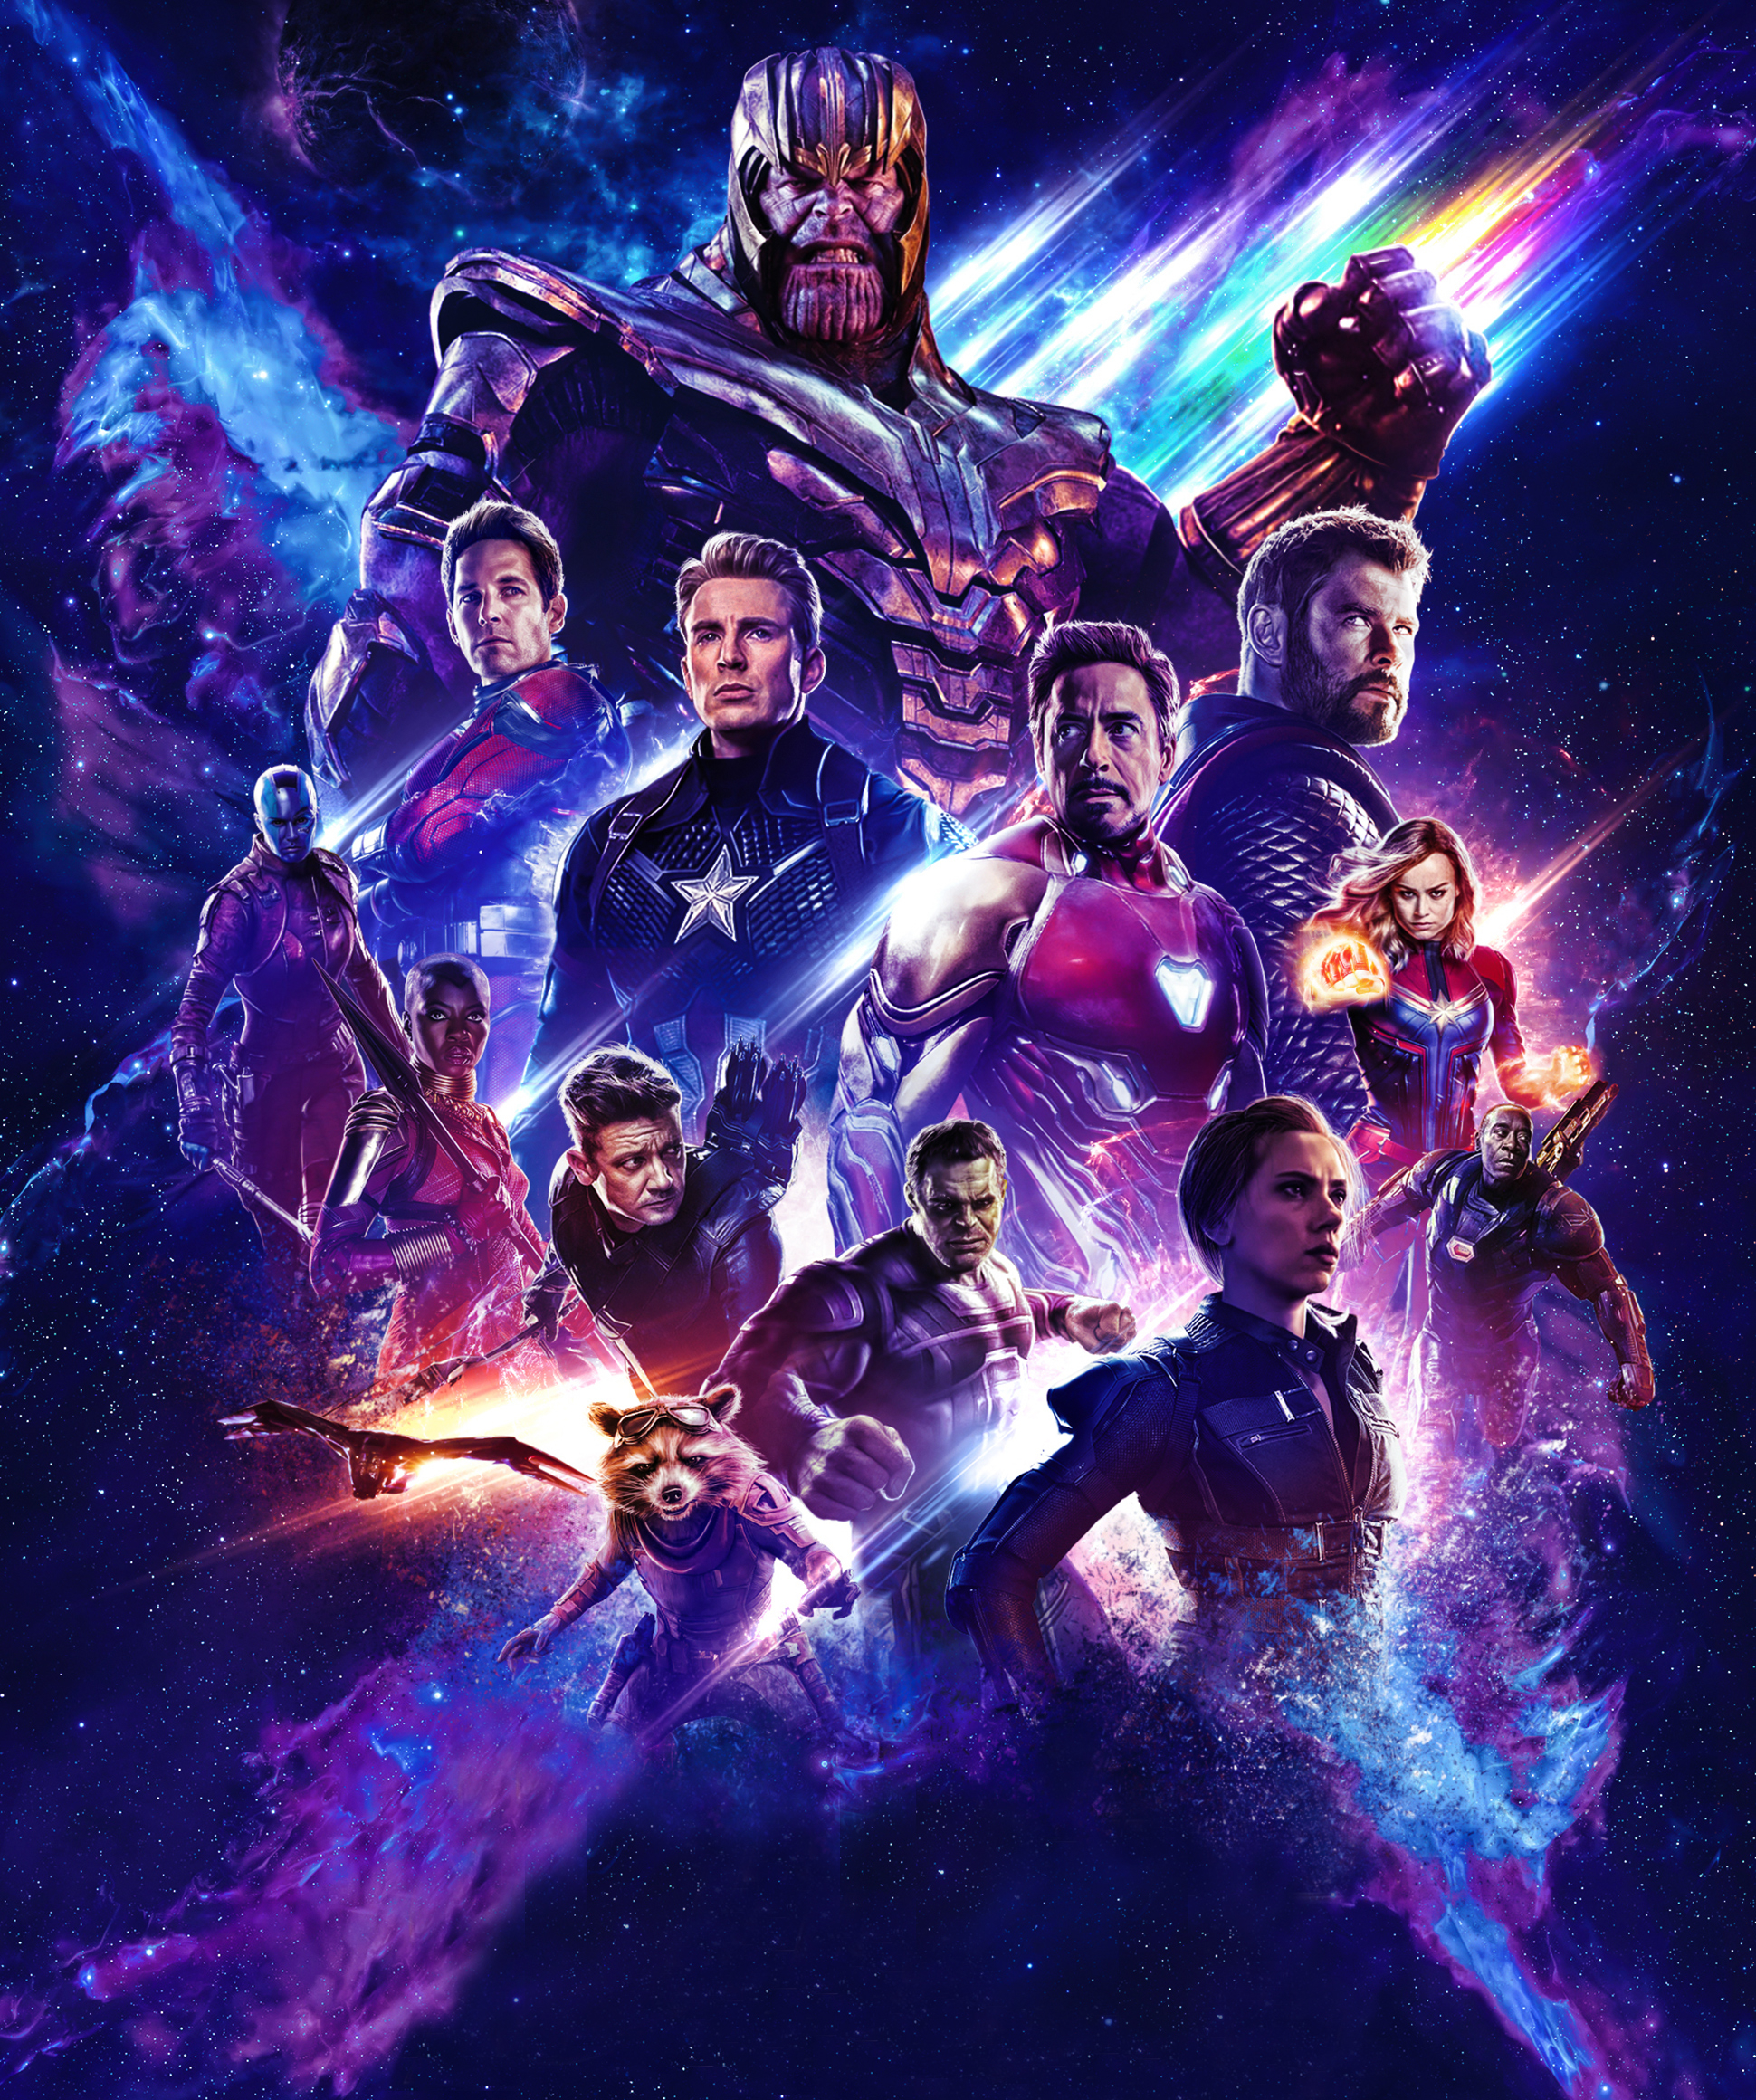 1440x 19 Avengers Endgame Movie 1440x Resolution Wallpaper Hd Movies 4k Wallpapers Images Photos And Background Wallpapers Den